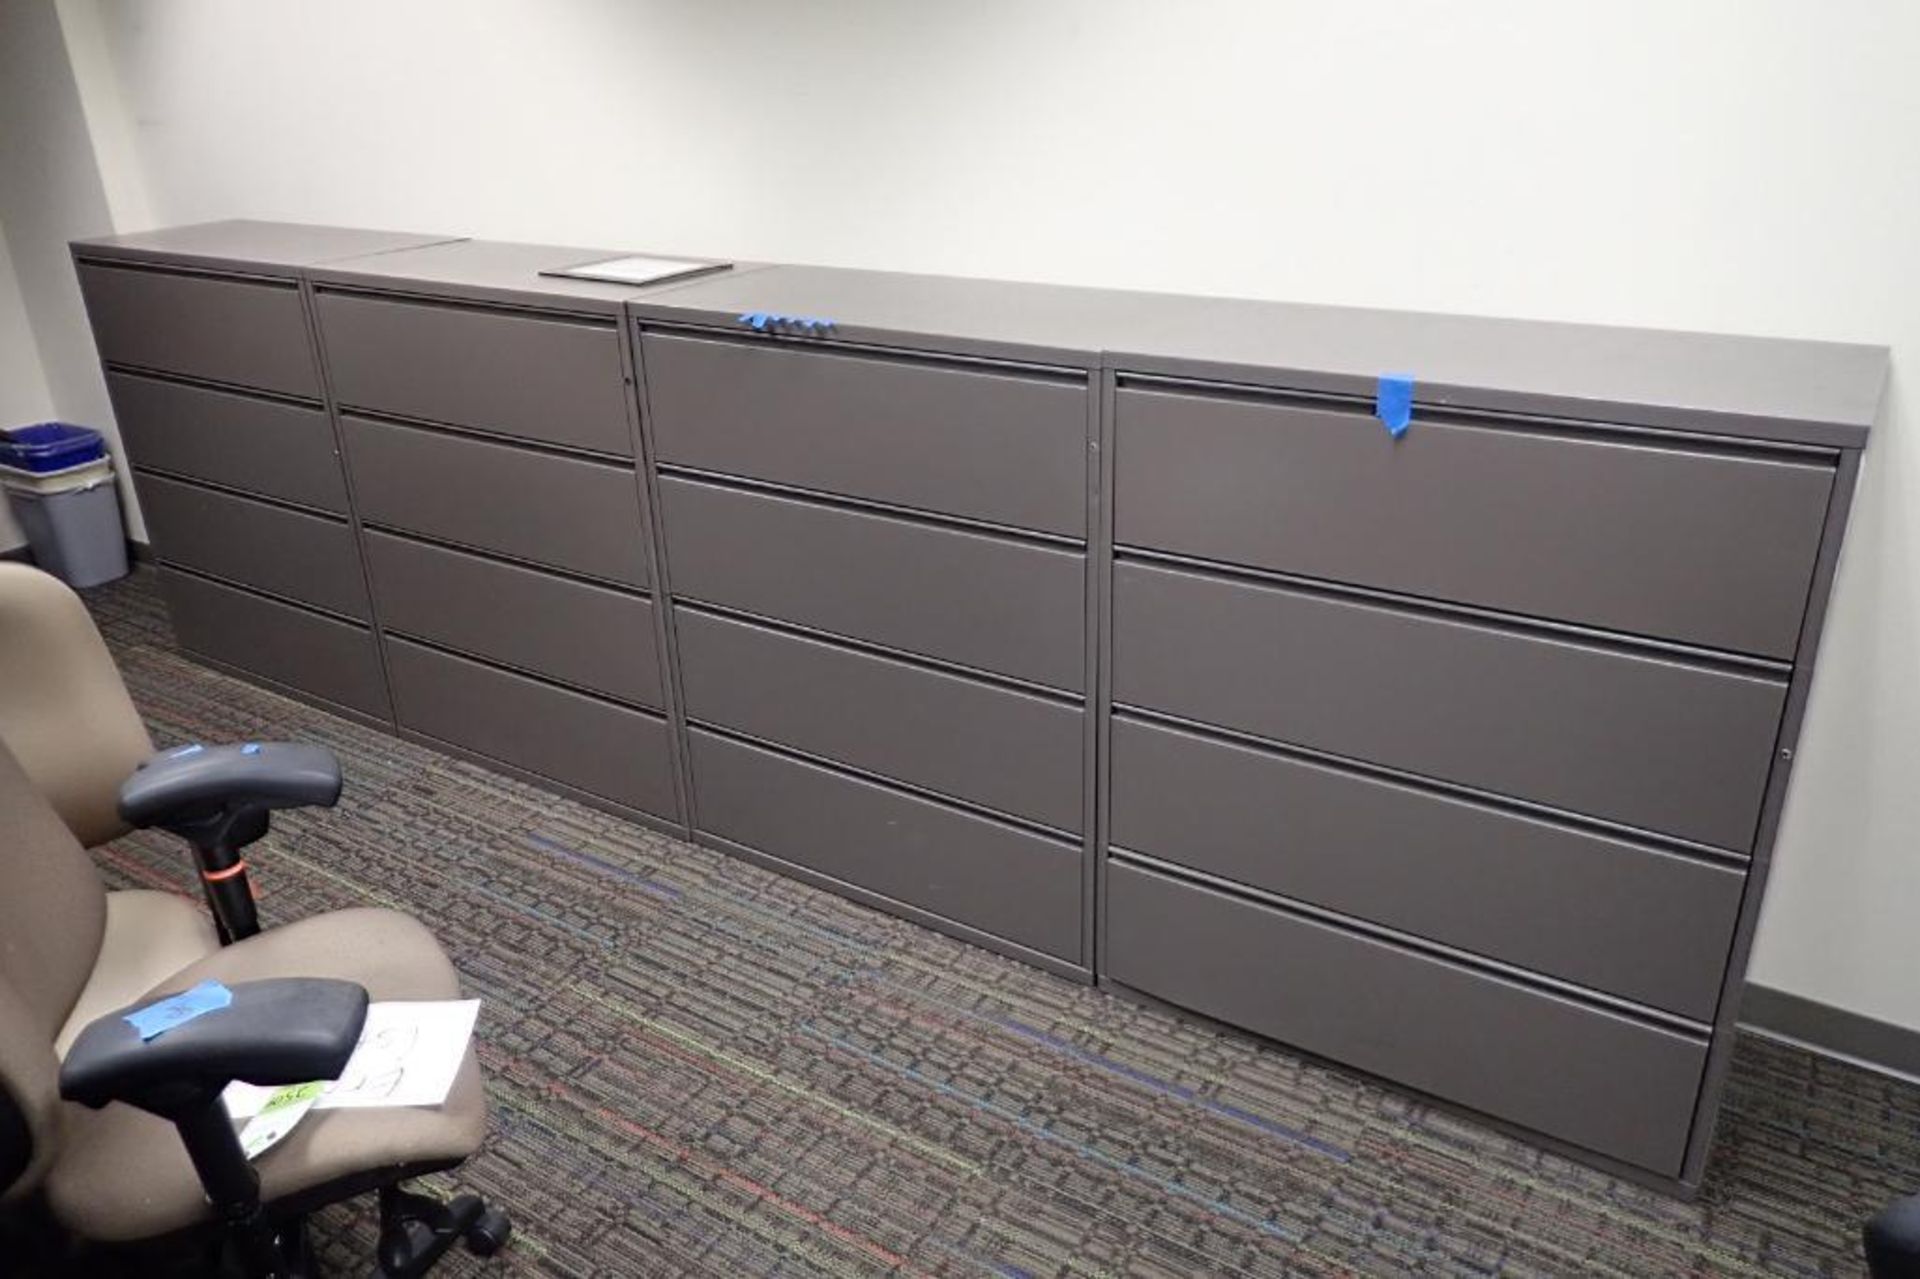 Lateral 4-drawer filing cabinets